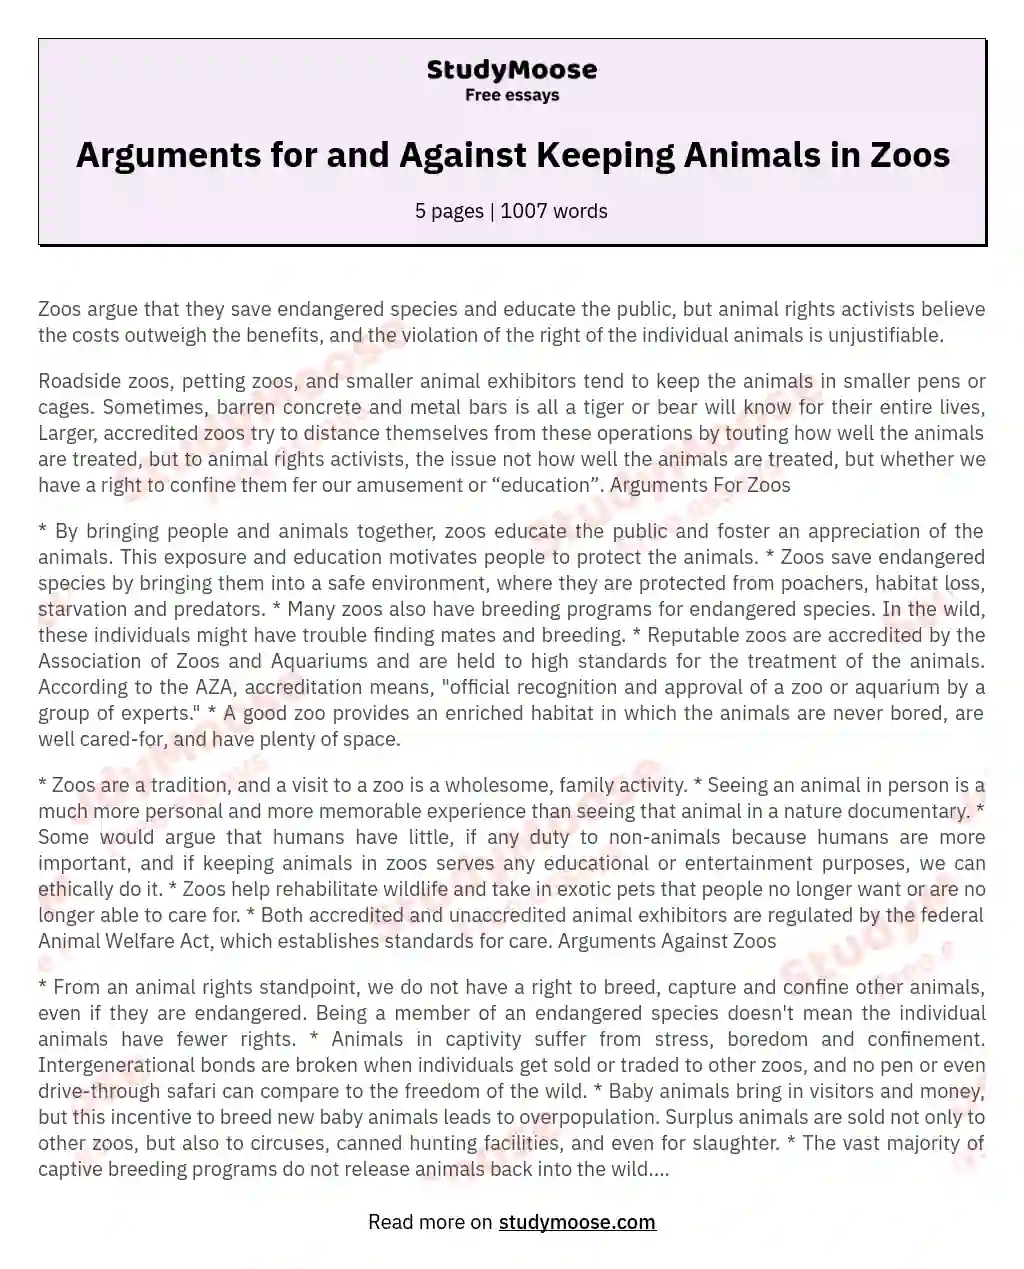 Arguments for and Against Keeping Animals in Zoos